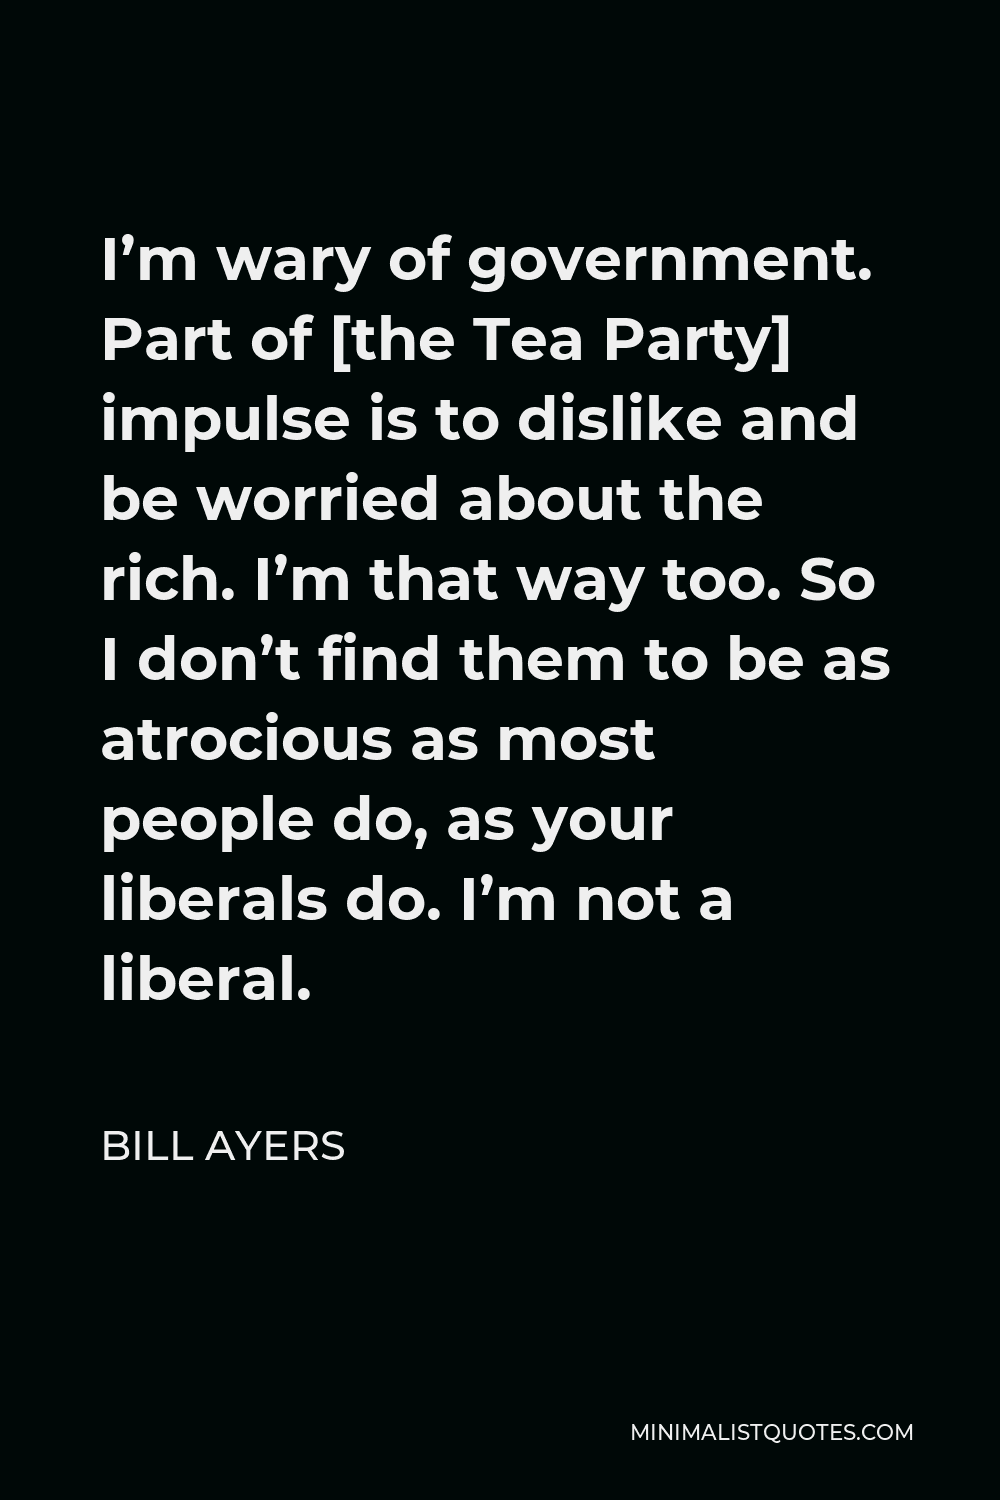 Bill Ayers Quote - I’m wary of government. Part of [the Tea Party] impulse is to dislike and be worried about the rich. I’m that way too. So I don’t find them to be as atrocious as most people do, as your liberals do. I’m not a liberal.